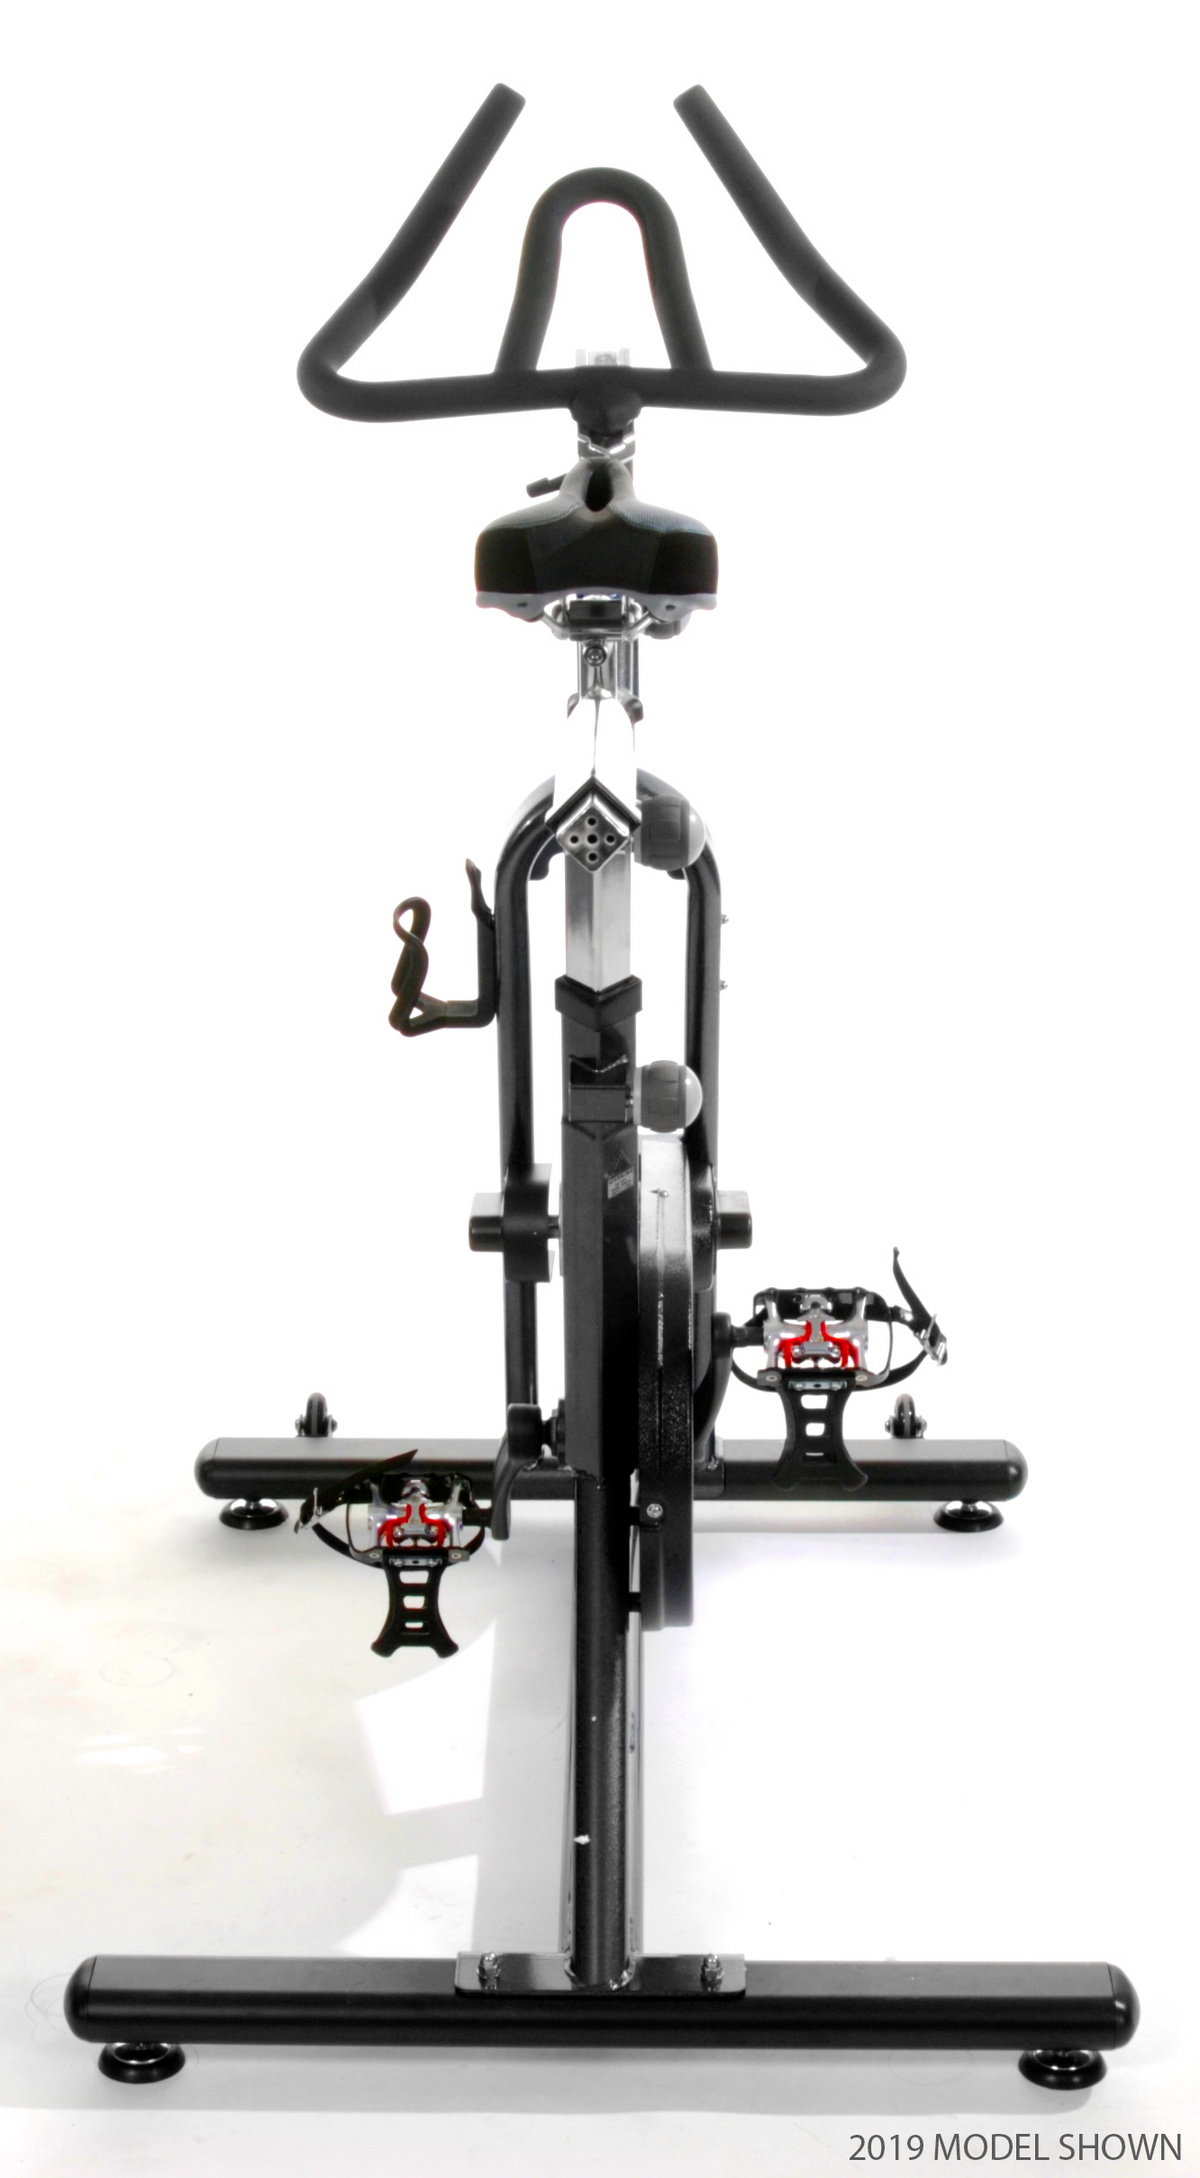 Progression Fitness Pro Club 24 Spin Bike **AVAILABLE NOW**